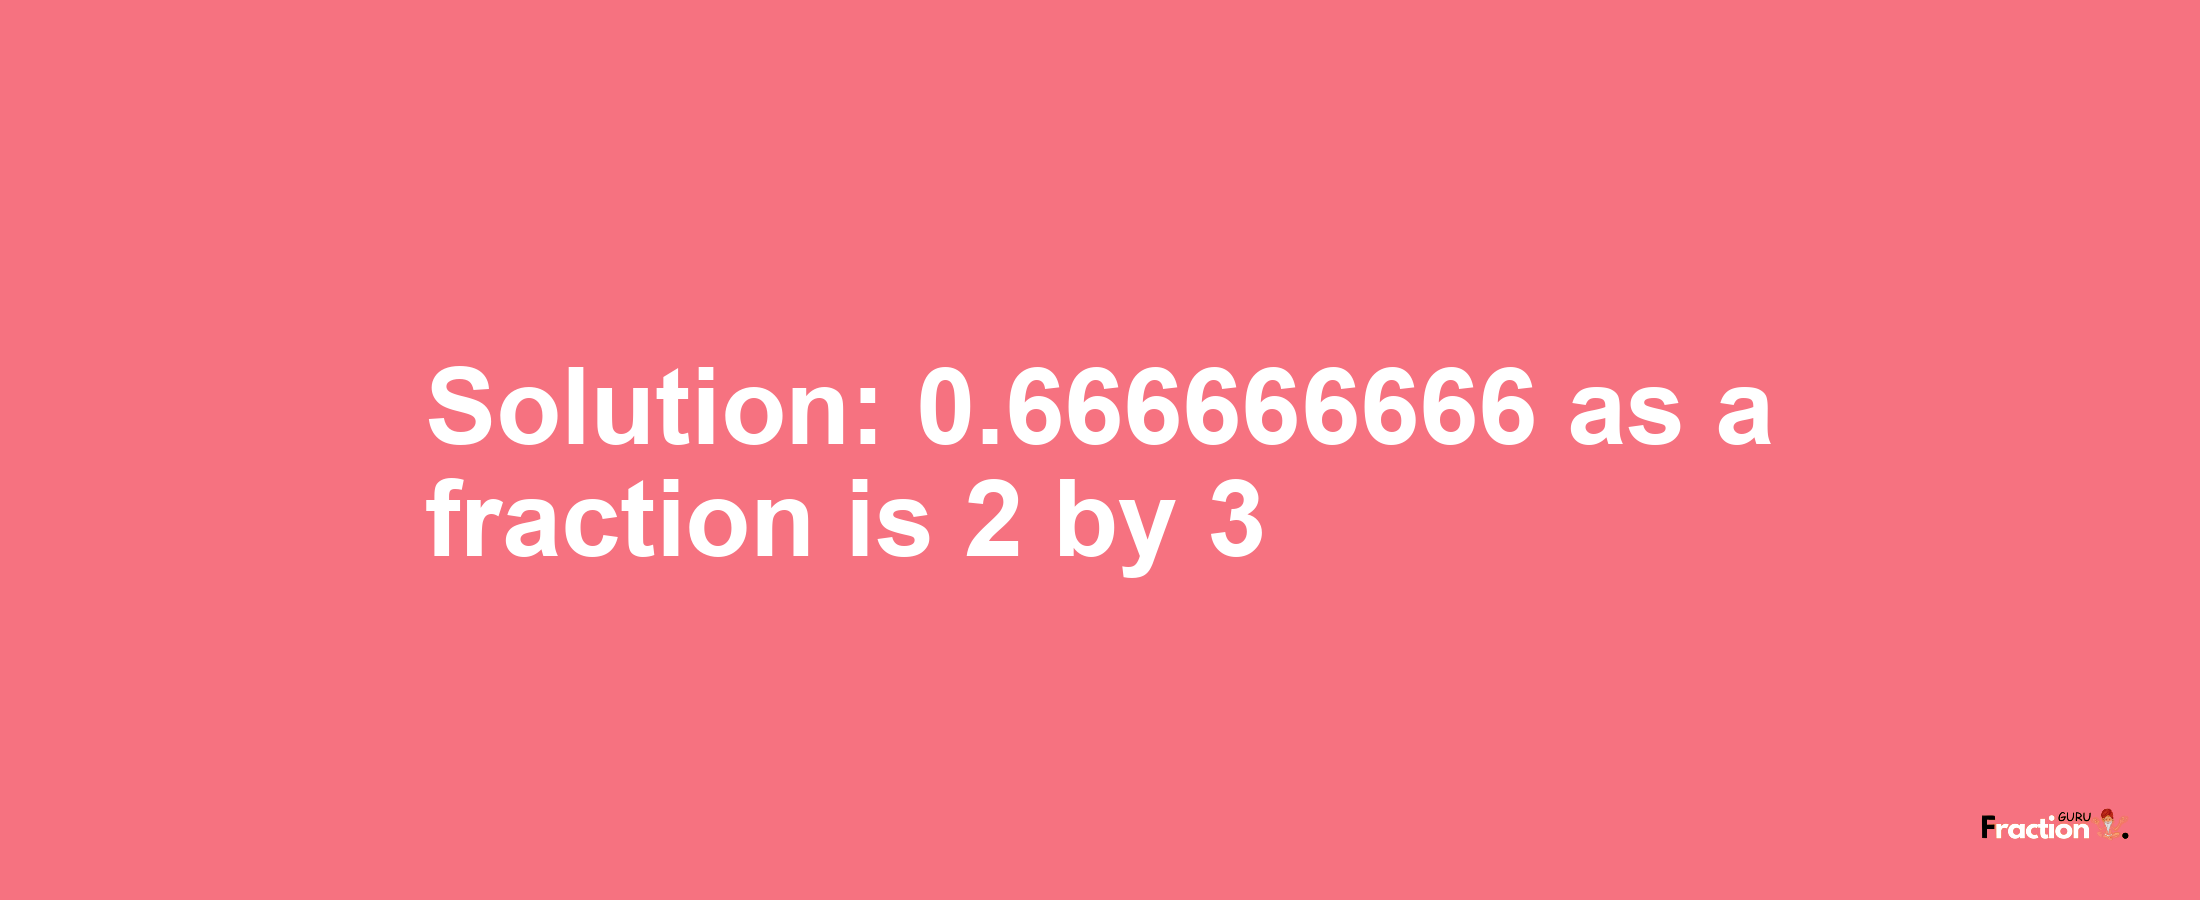 Solution:0.666666666 as a fraction is 2/3